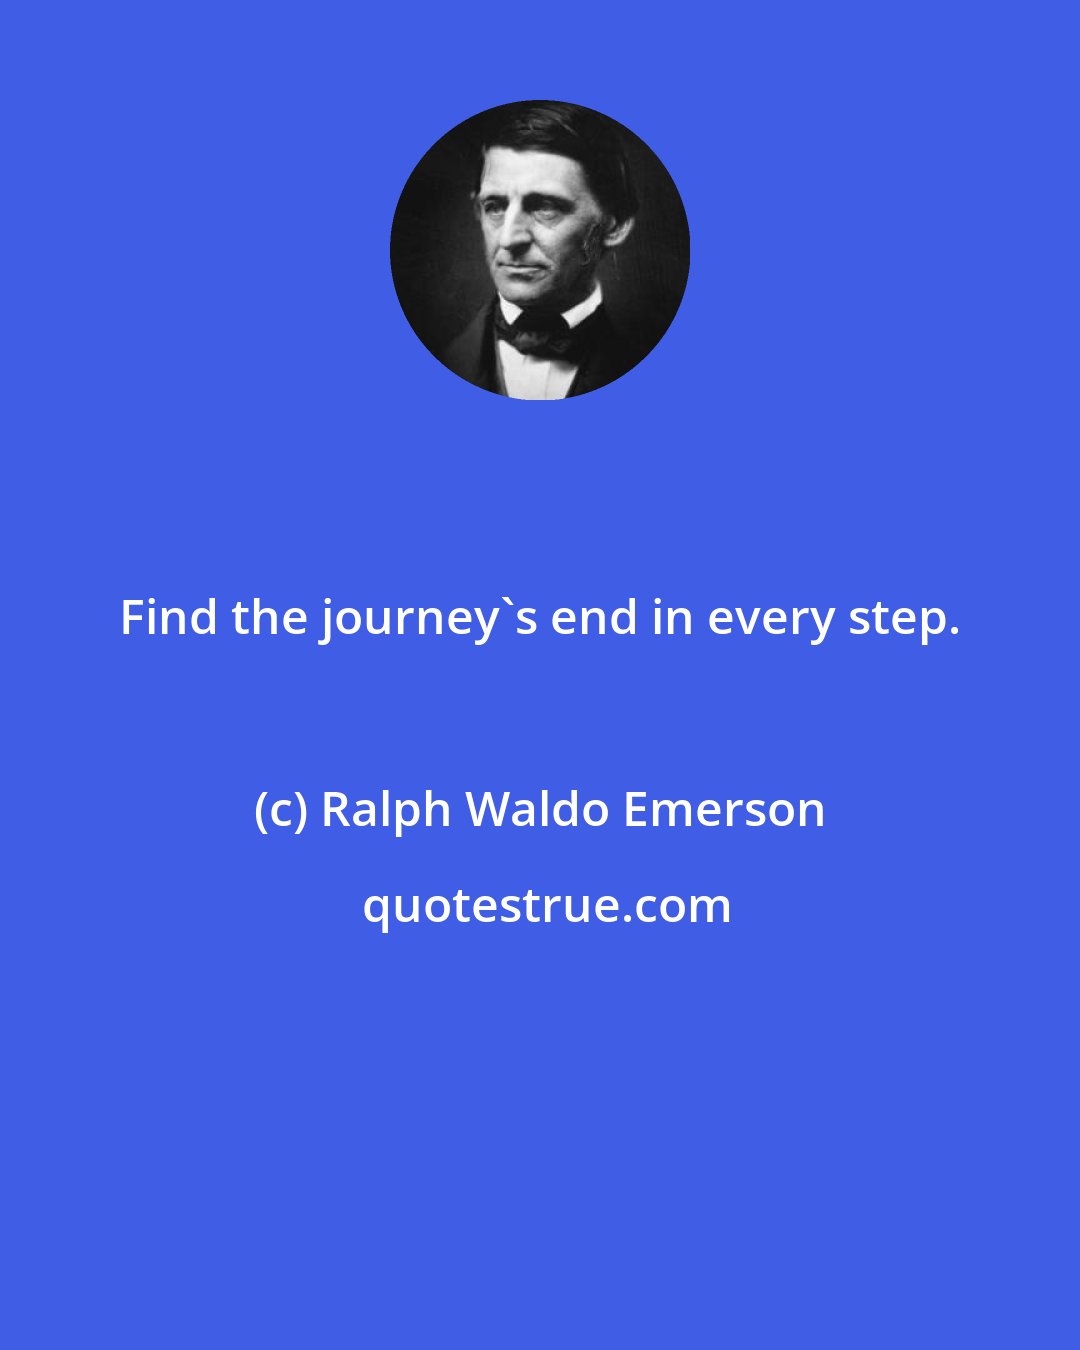 Ralph Waldo Emerson: Find the journey's end in every step.